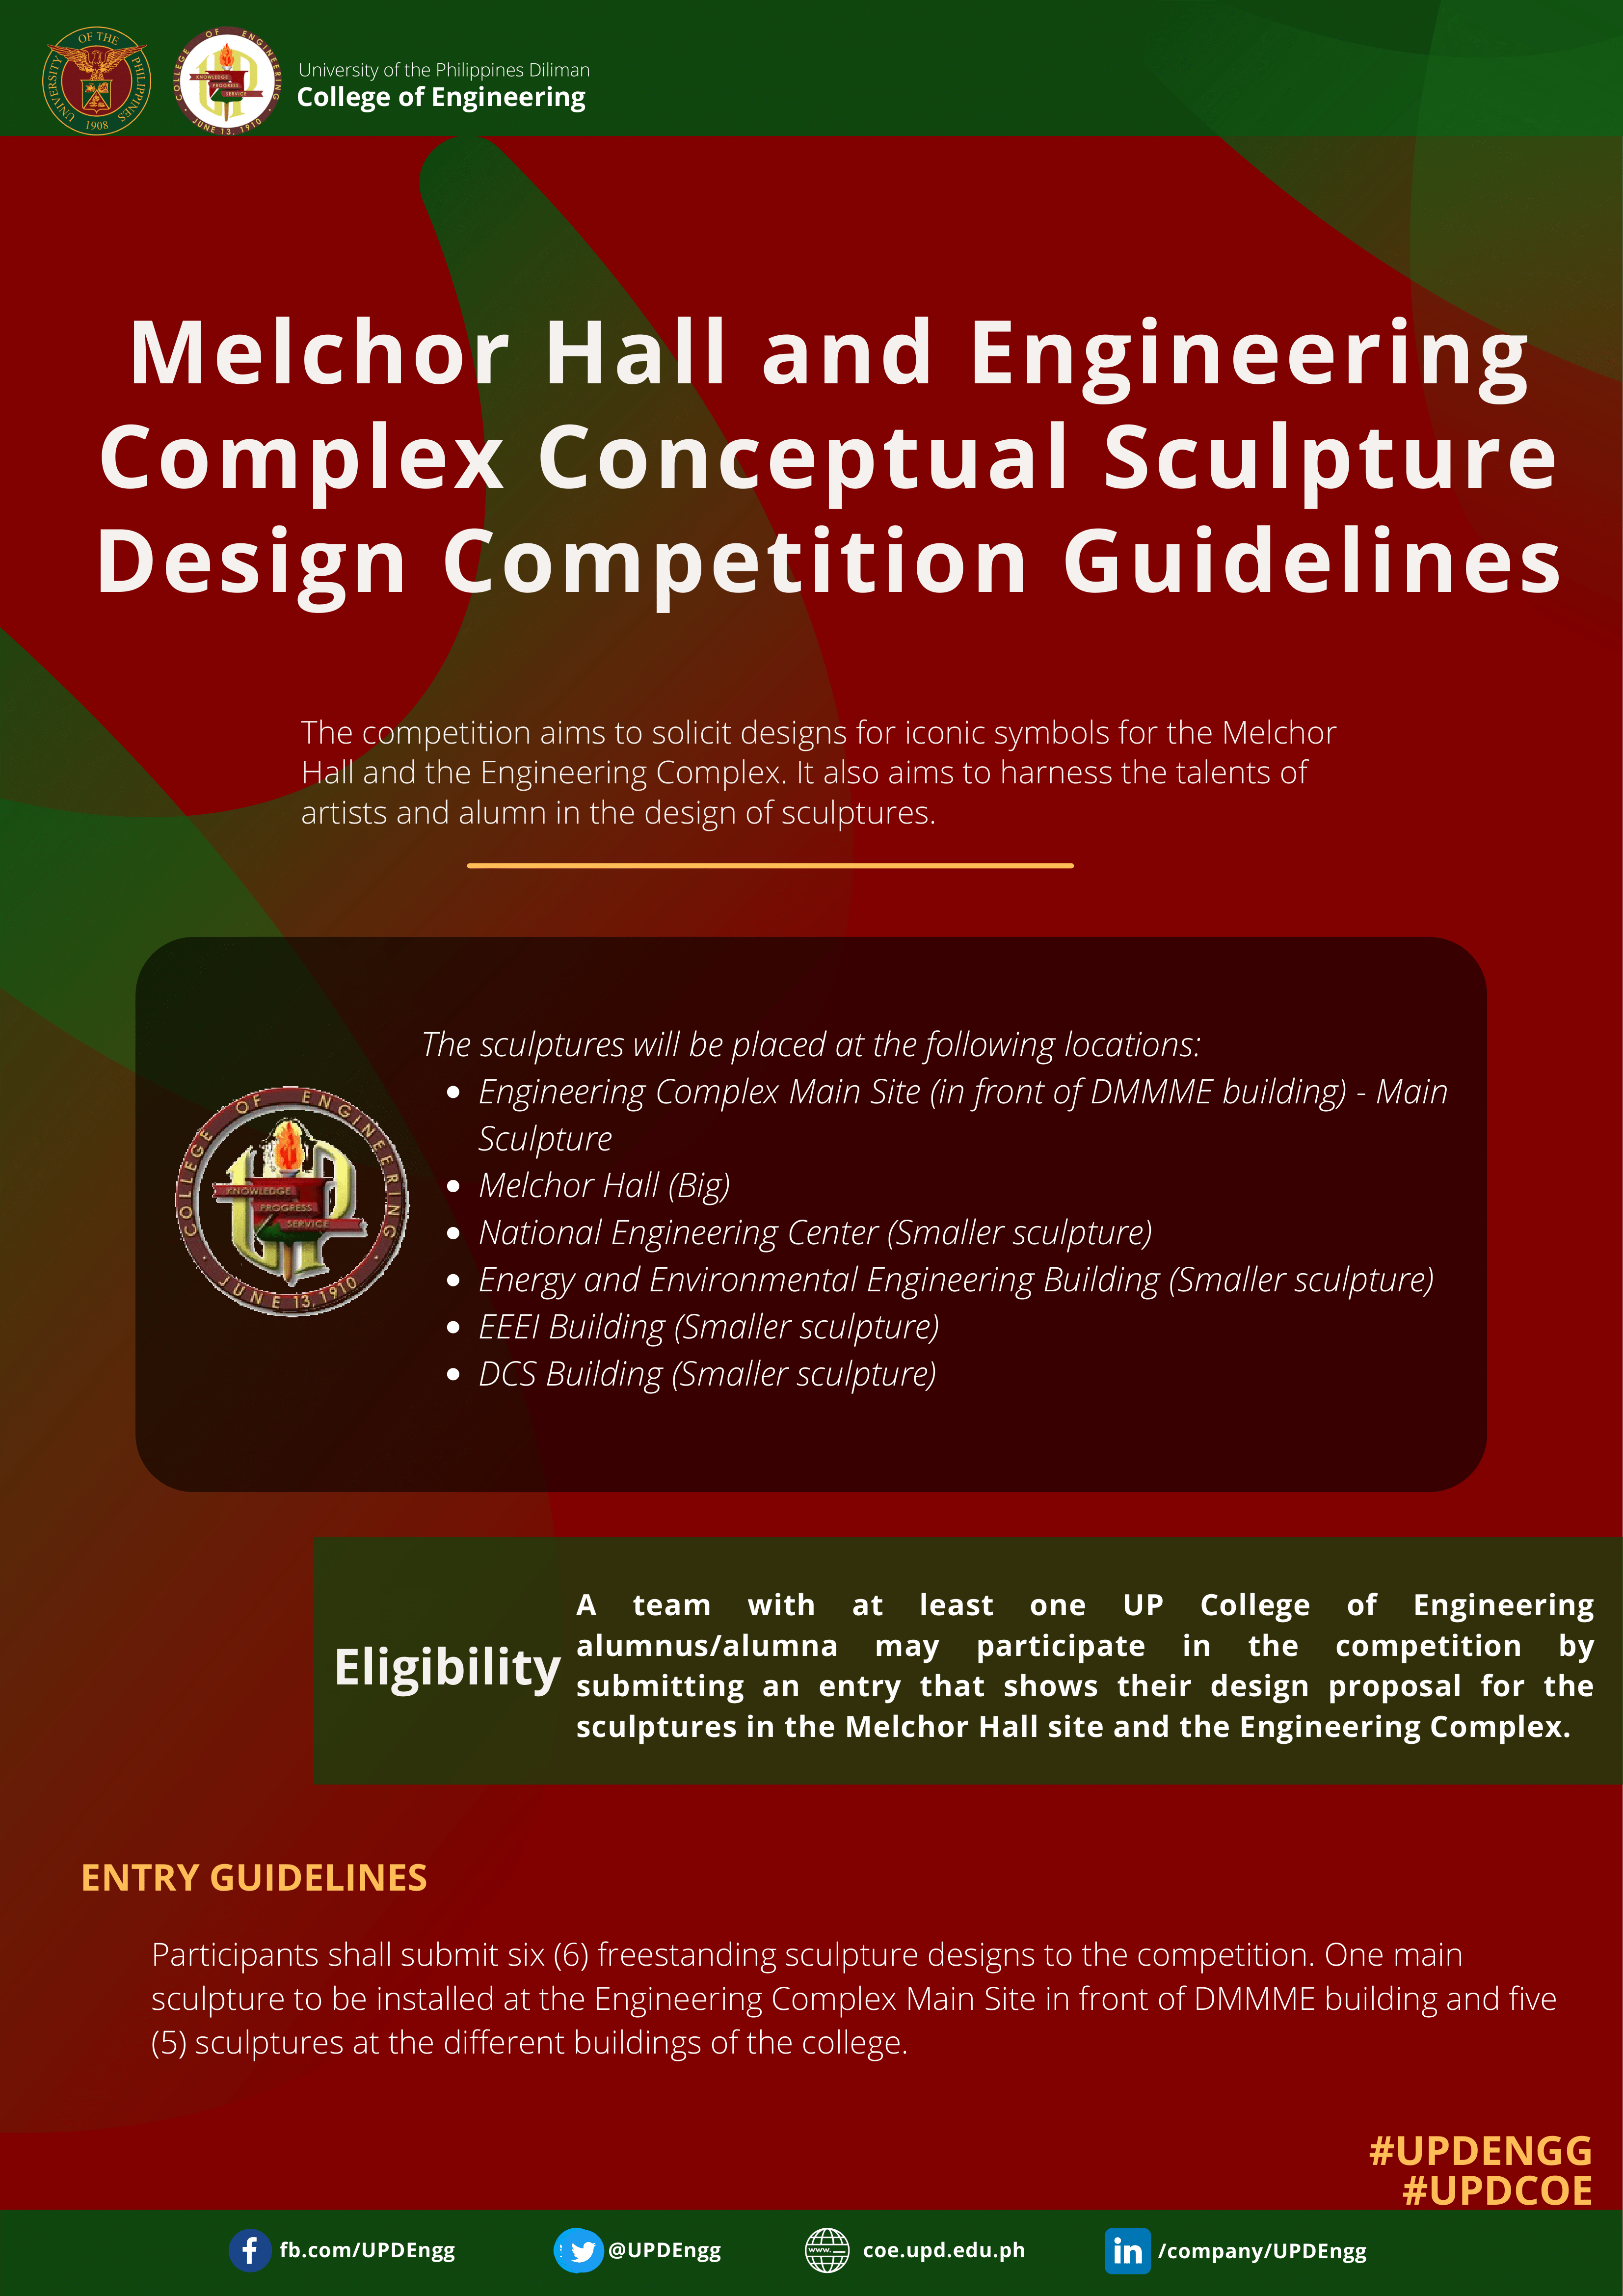 UPD COE Melchor Hall and Engineering Complex Conceptual Sculpture Design Competition (extended Deadline)